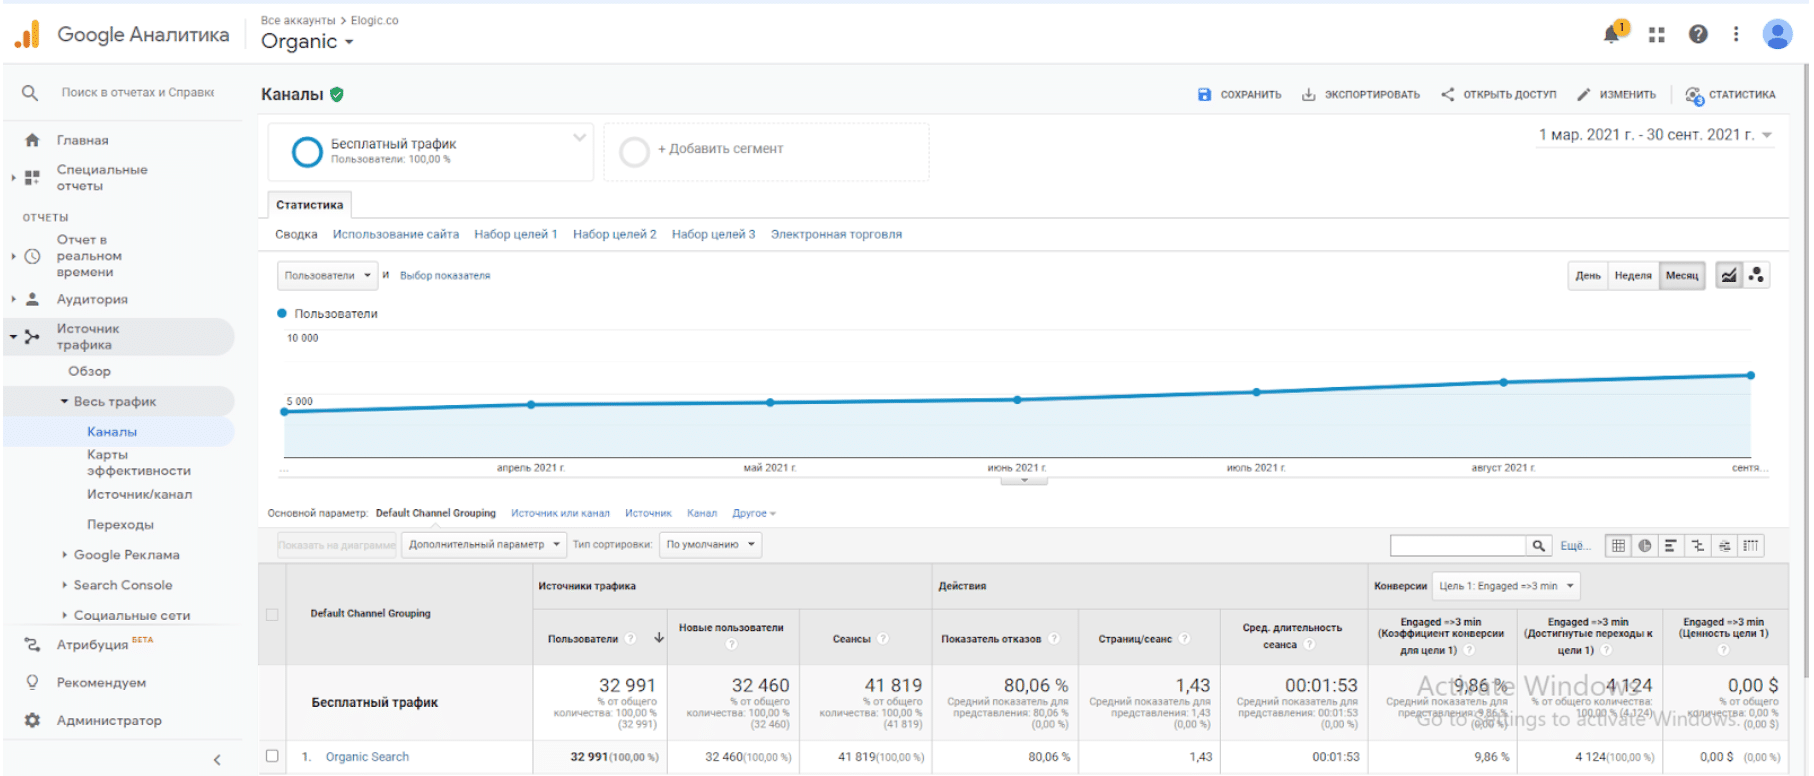 SEO for IT outsourcing company in a narrow tech niche: 2x traffic growth, 46 keywords in TOP 10 in 6 months - 1